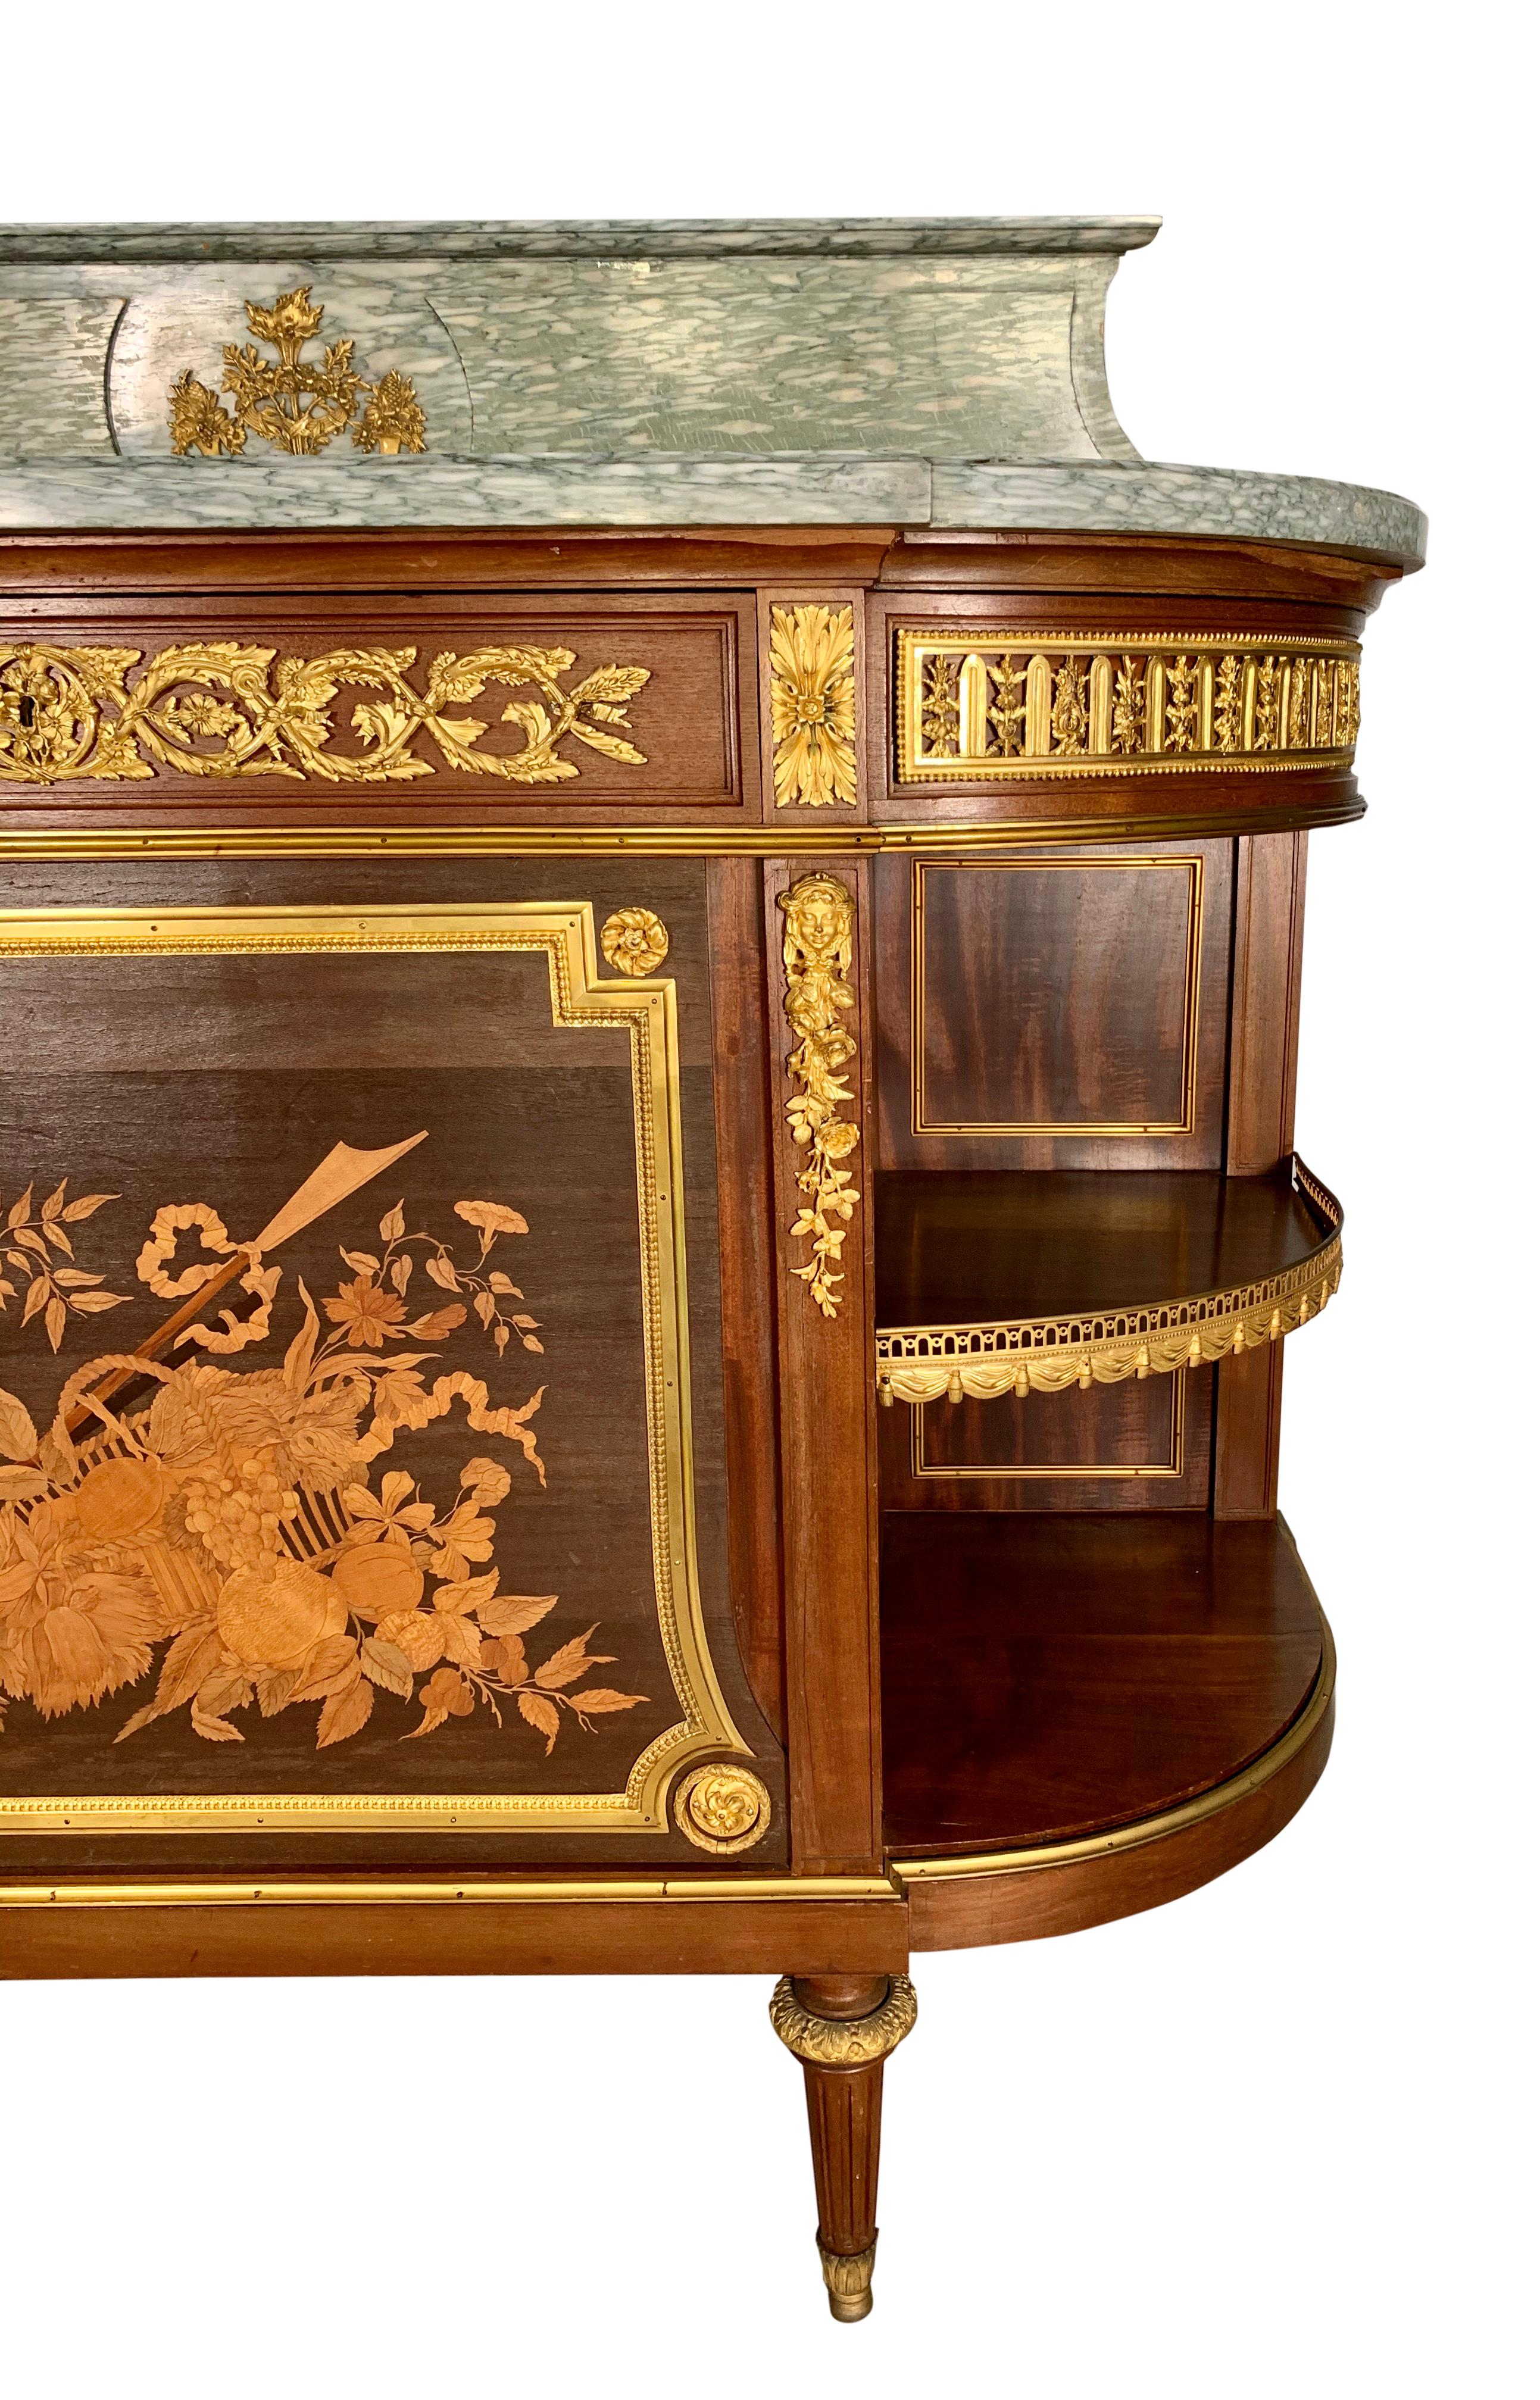 Antique French Ormolu-Mounted Mahogany Console or Desserte In Excellent Condition For Sale In Los Angeles, CA